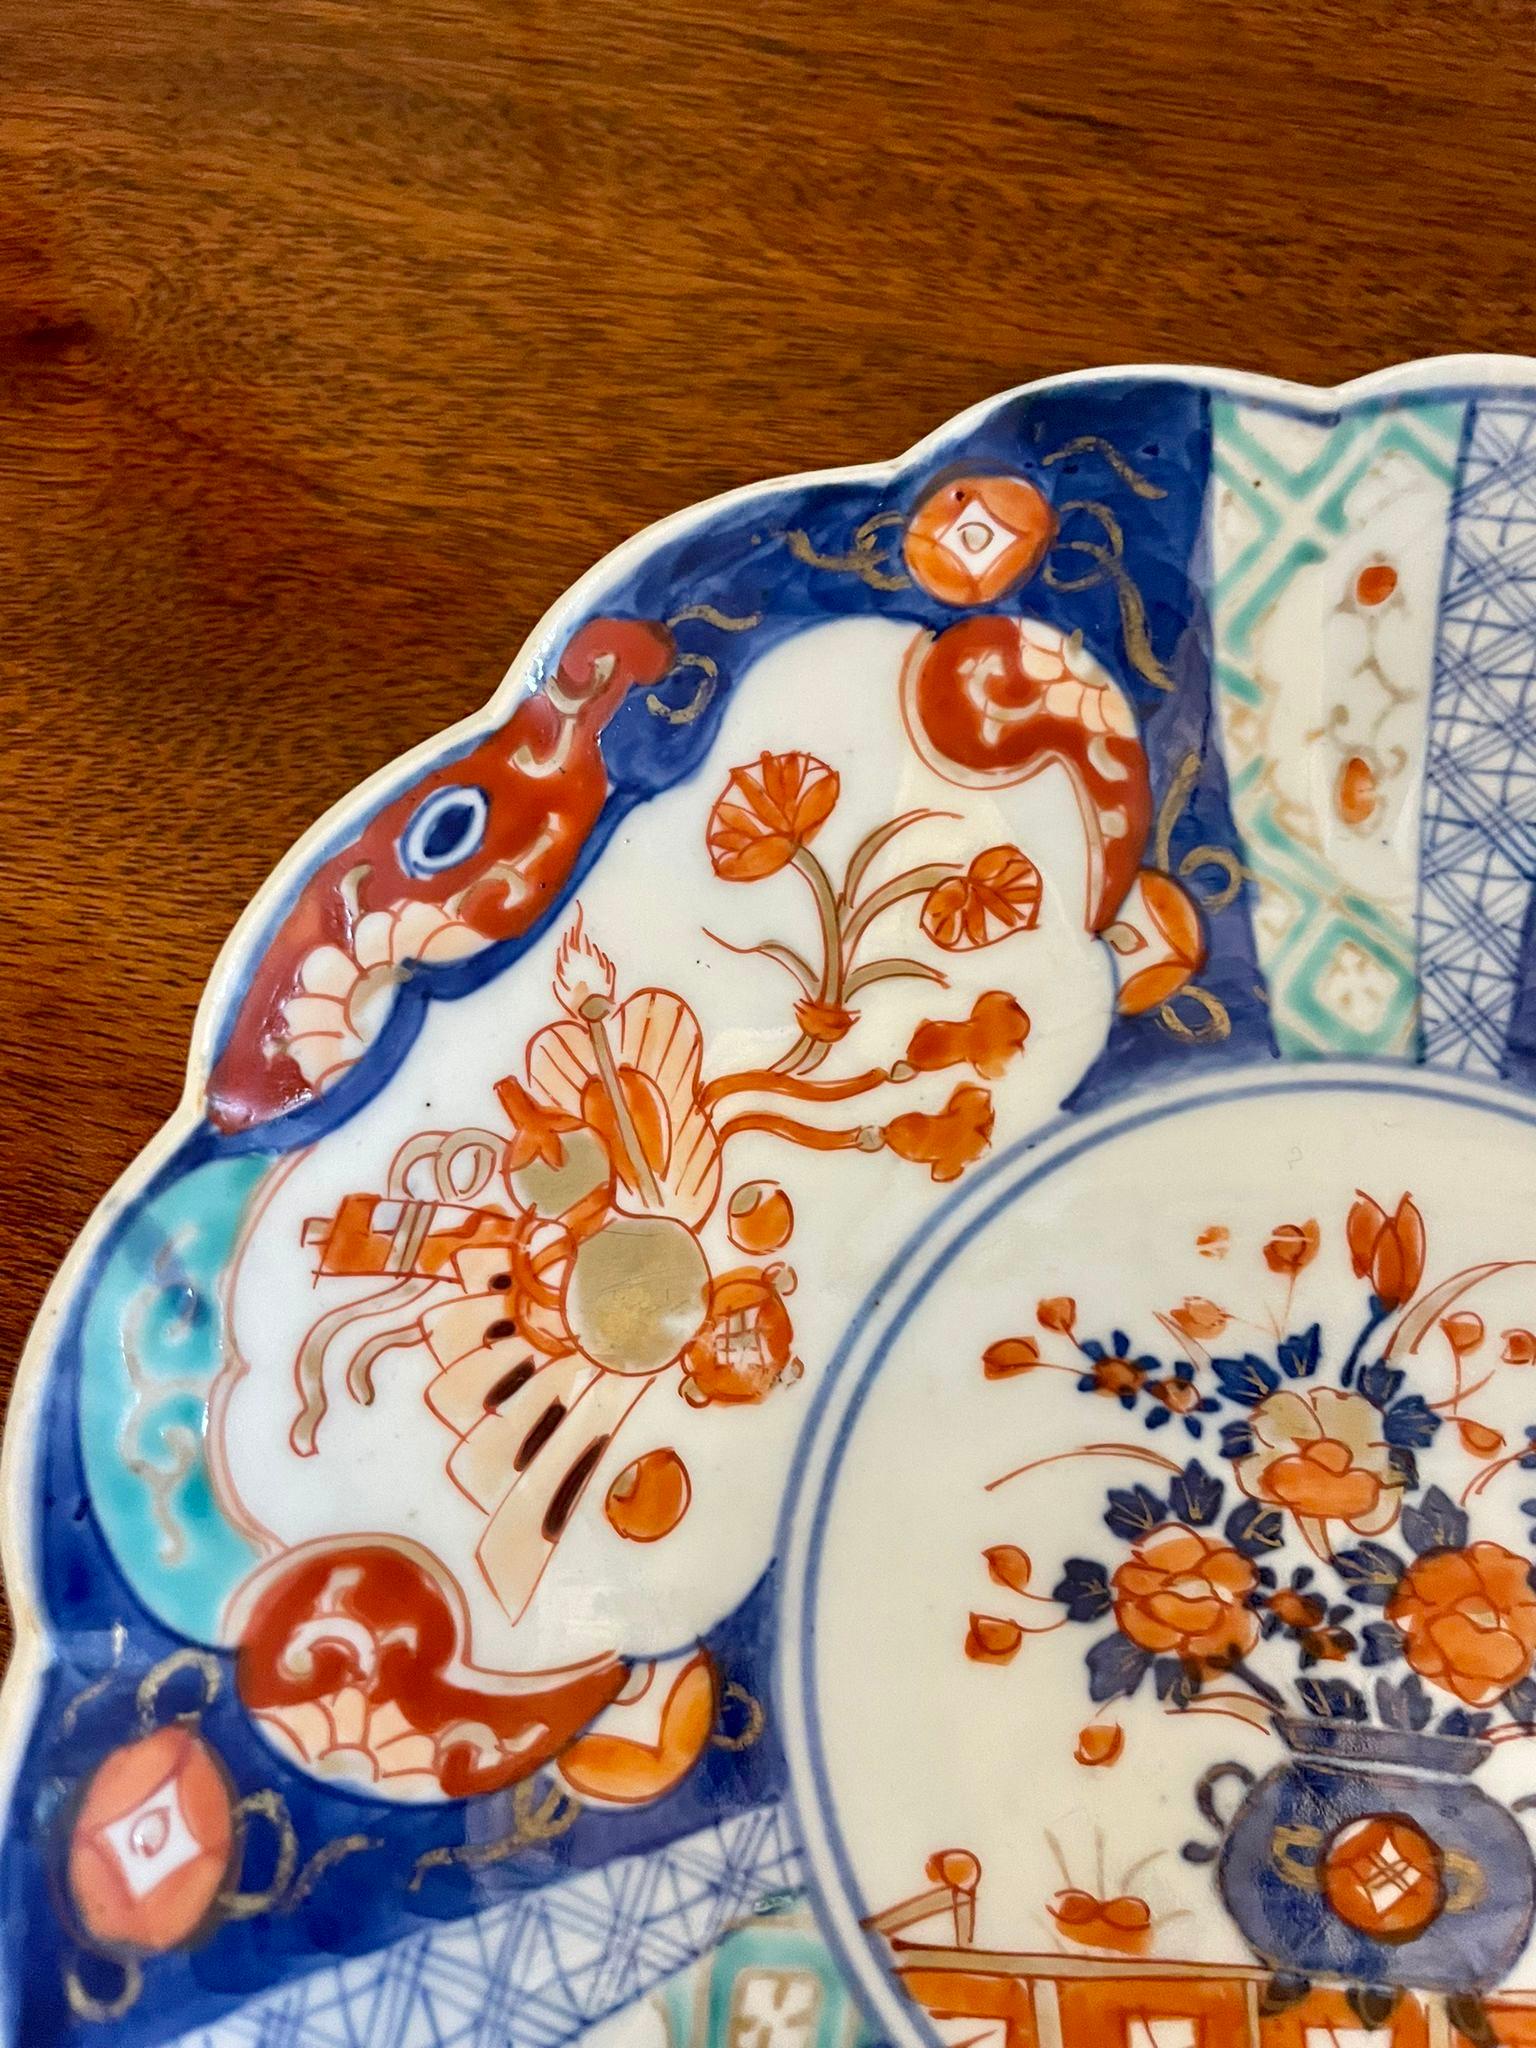 Antique quality Japanese Imari plate having a scalloped edge with wonderful hand painted panels in red, blue, green, white and gold colours 


In lovely original condition


Dimensions:
Height 3.5 cm 
Width 22 cm
Depth 22 cm


Dated 1900 
